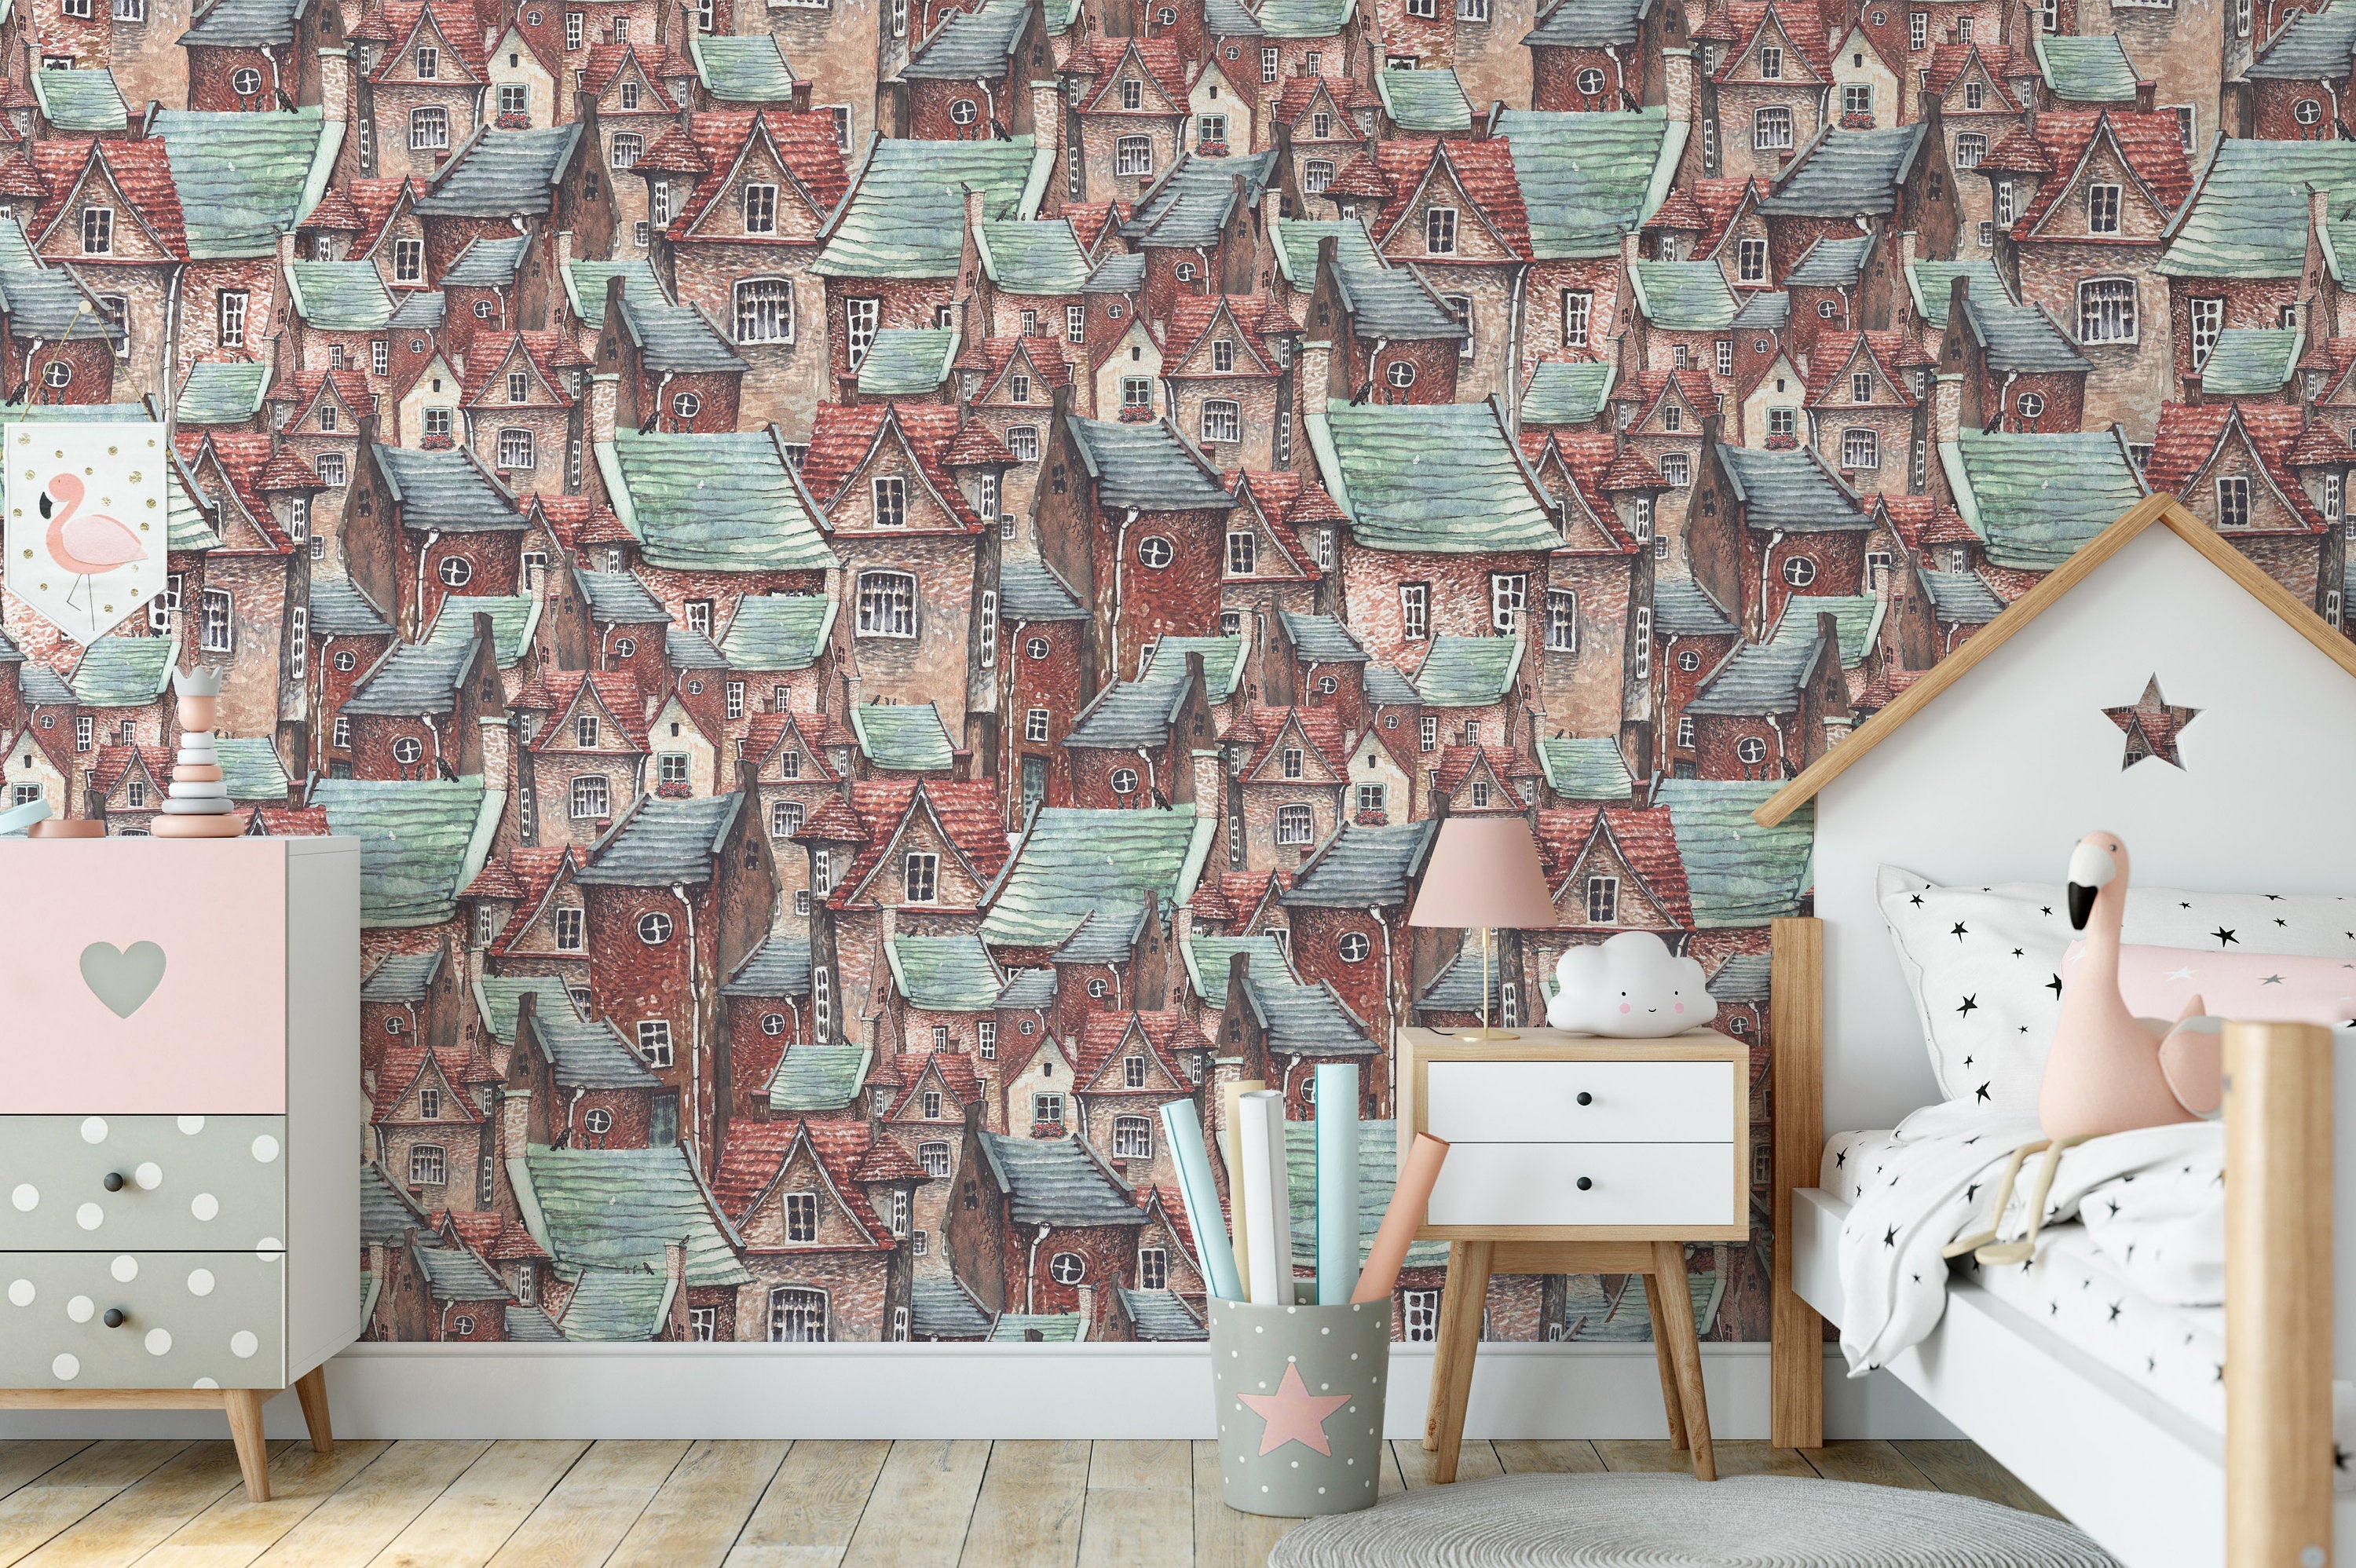 Old Town European Brick Houses and Roofs Background Wallpaper Bedroom Children Kids Room Mural Home Decor Wall Art Removable